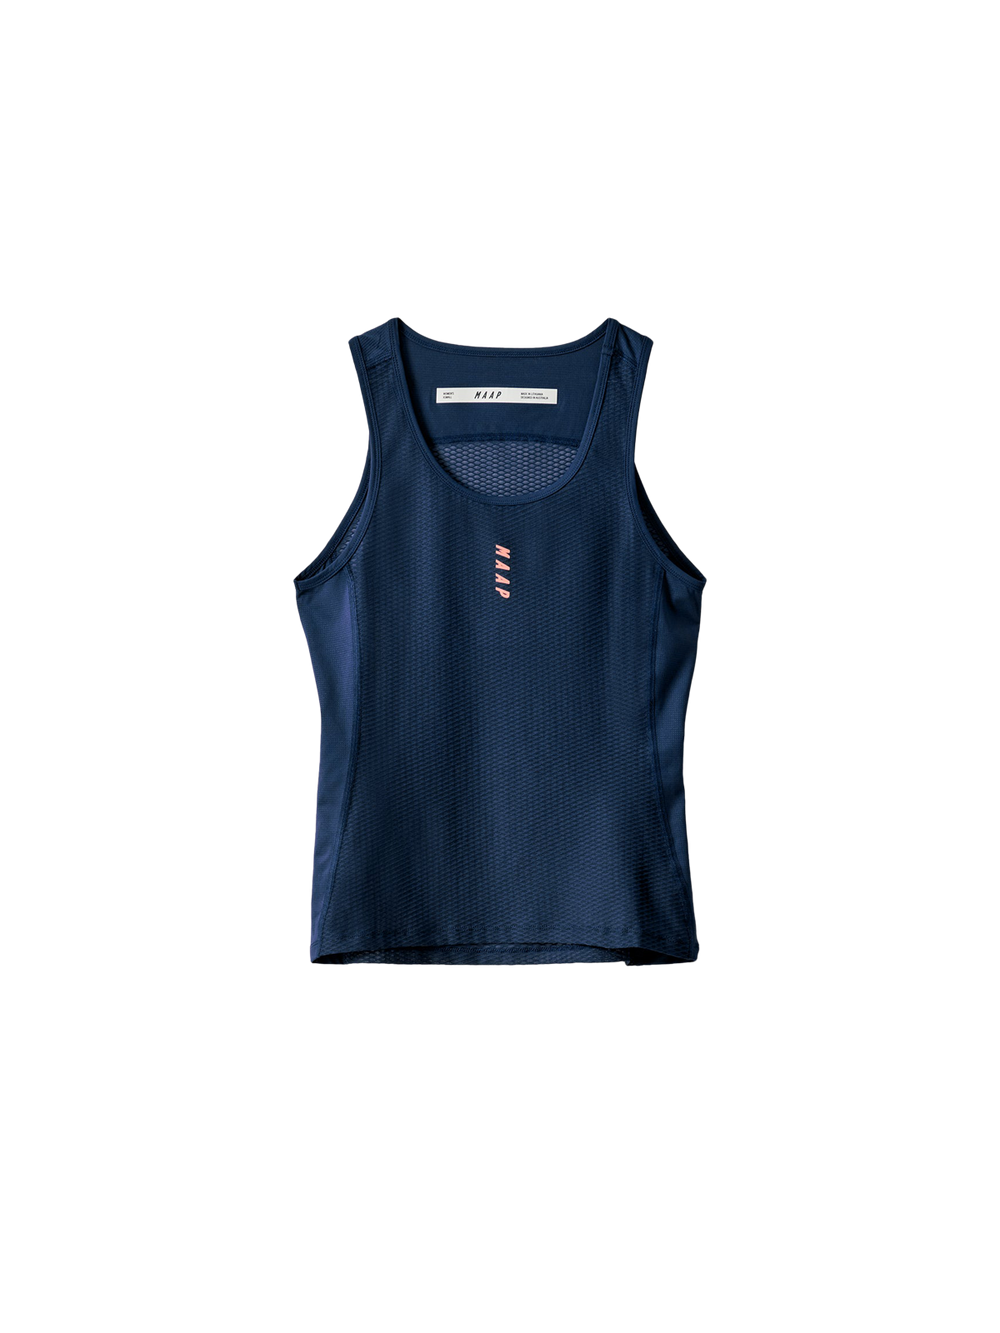 Product Image for Women's Team Base Layer